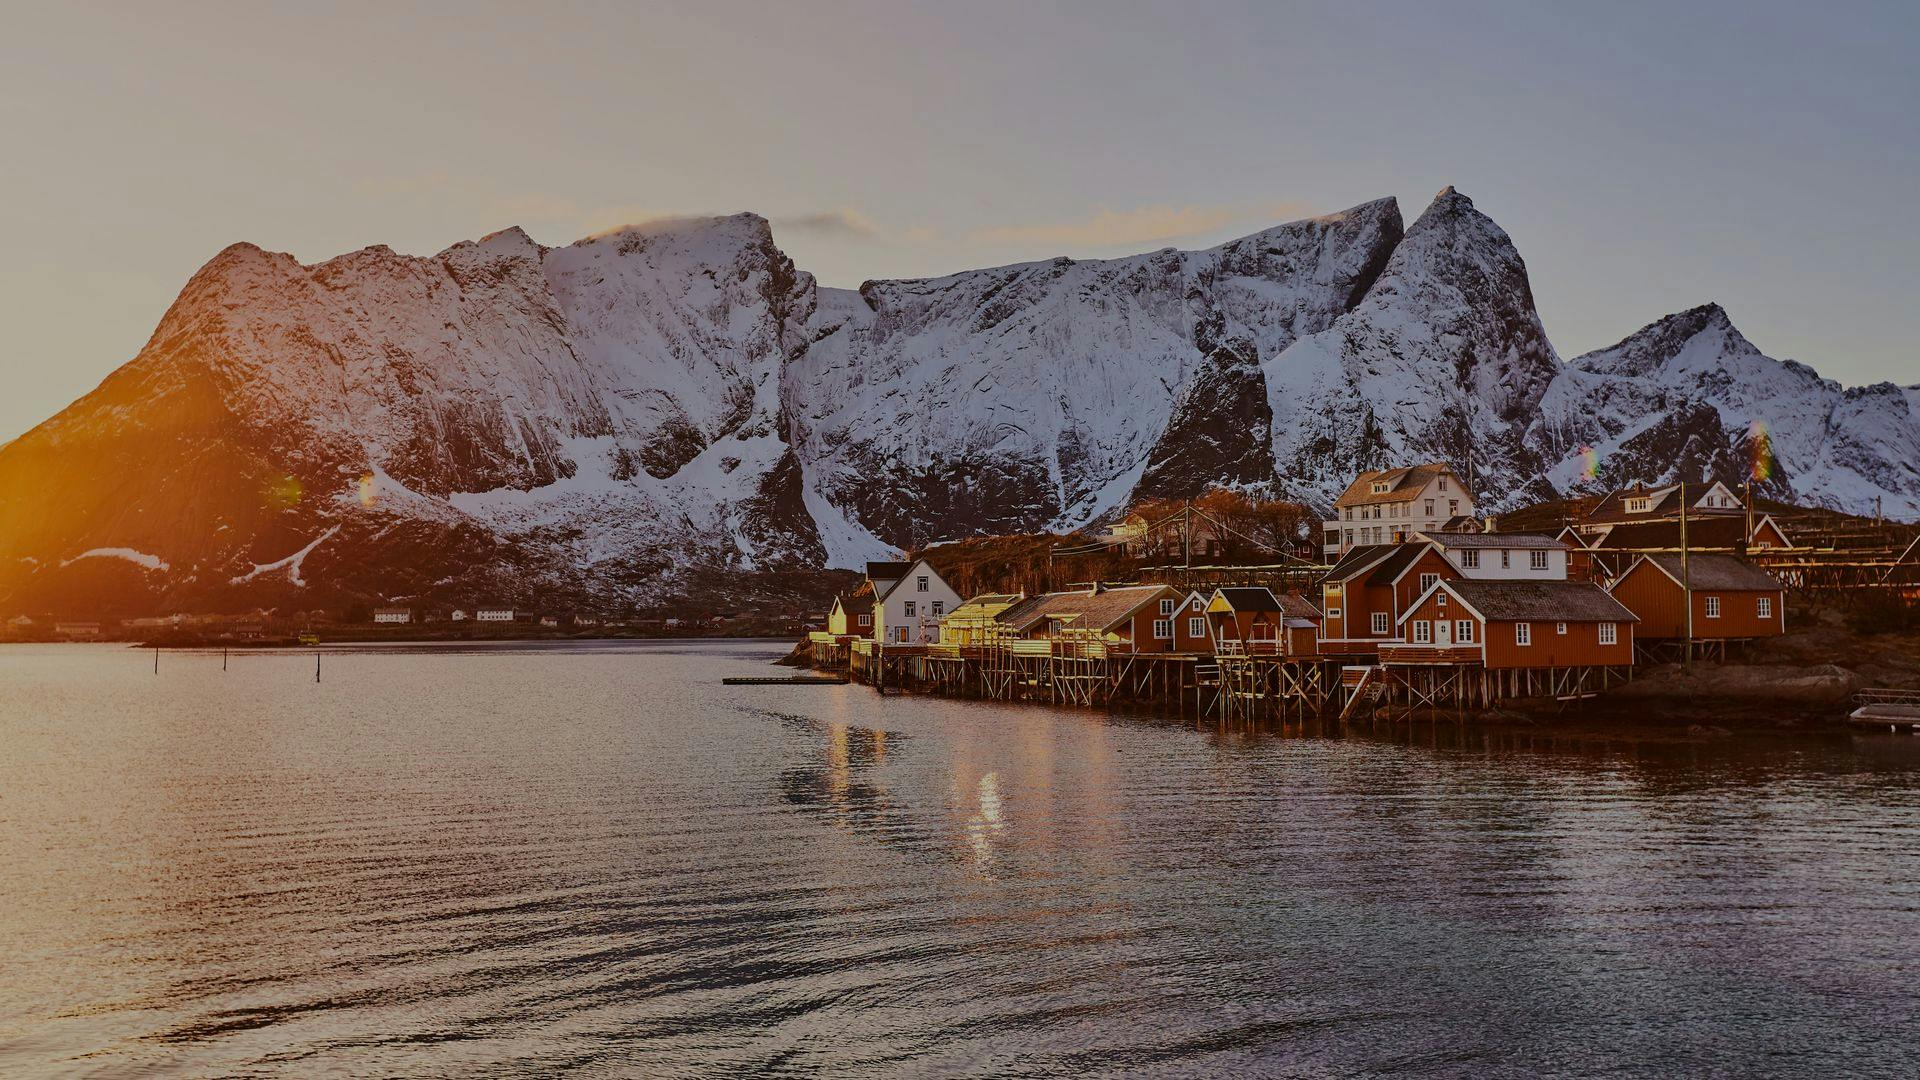 Coworking & Coliving by the surf in Lofoten, Norway at The Arctic Coworking Lodge